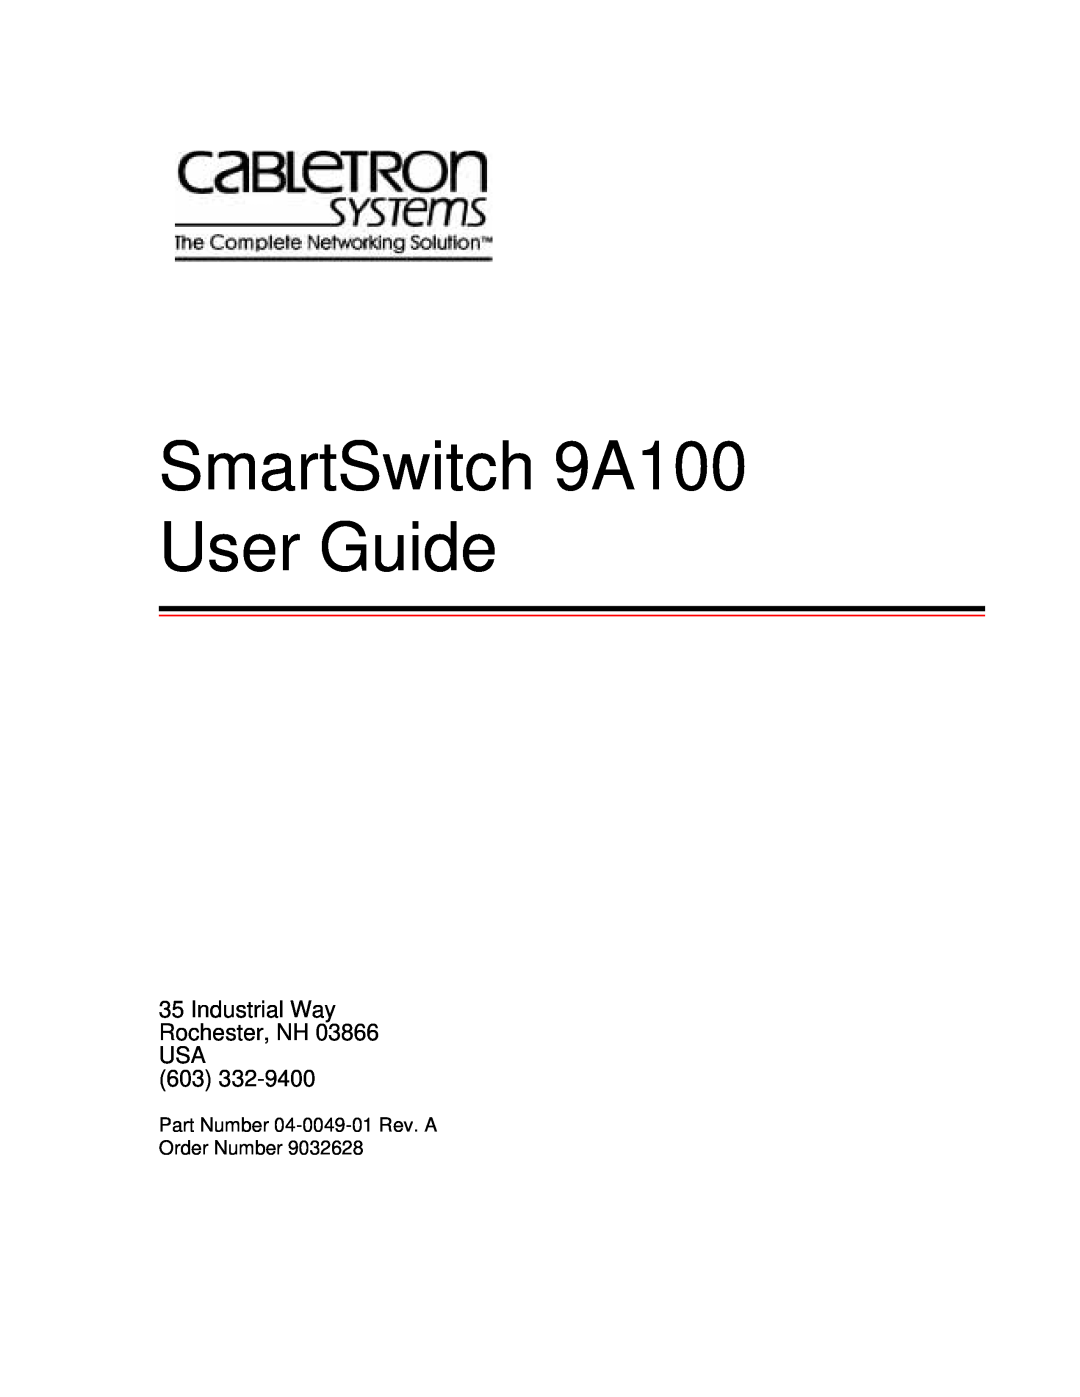 Cabletron Systems manual Part Number 04-0049-01 Rev. A Order Number, SmartSwitch 9A100 User Guide 